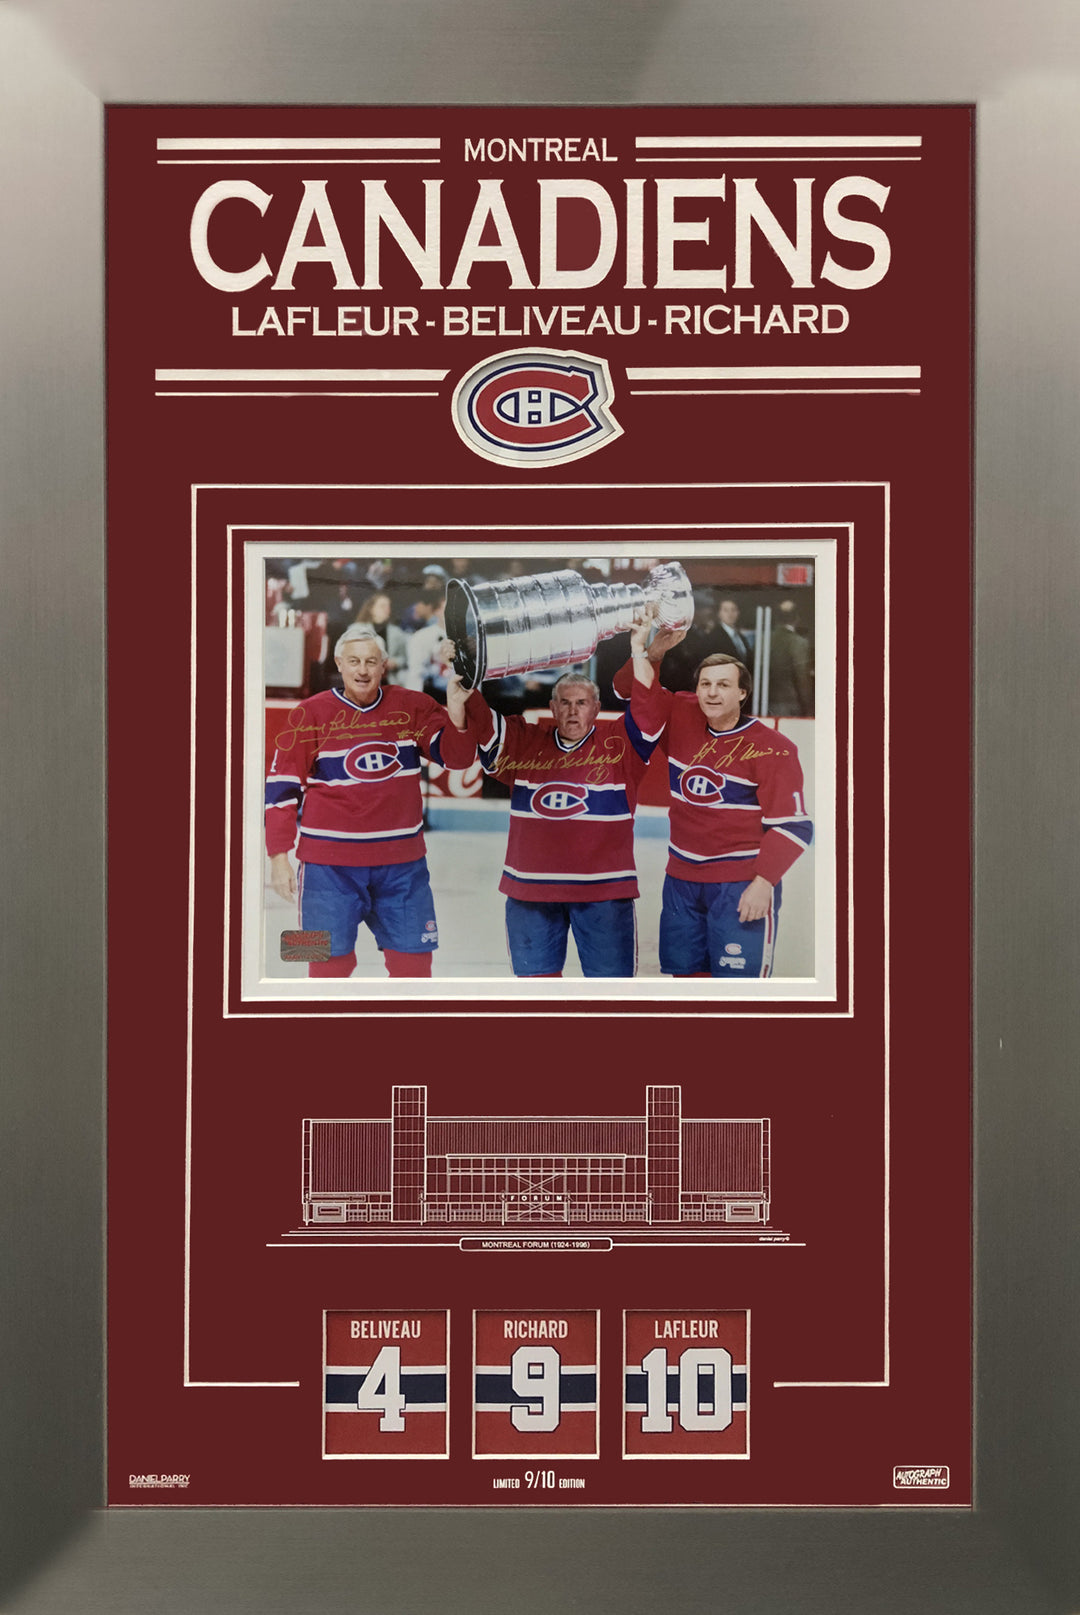 Lafleur, Richard & Beliveau Signed 8X10 Ltd Ed 9/10 Montreal Canadiens, Montreal Canadiens, NHL, Hockey, Autographed, Signed, AAPCH33007